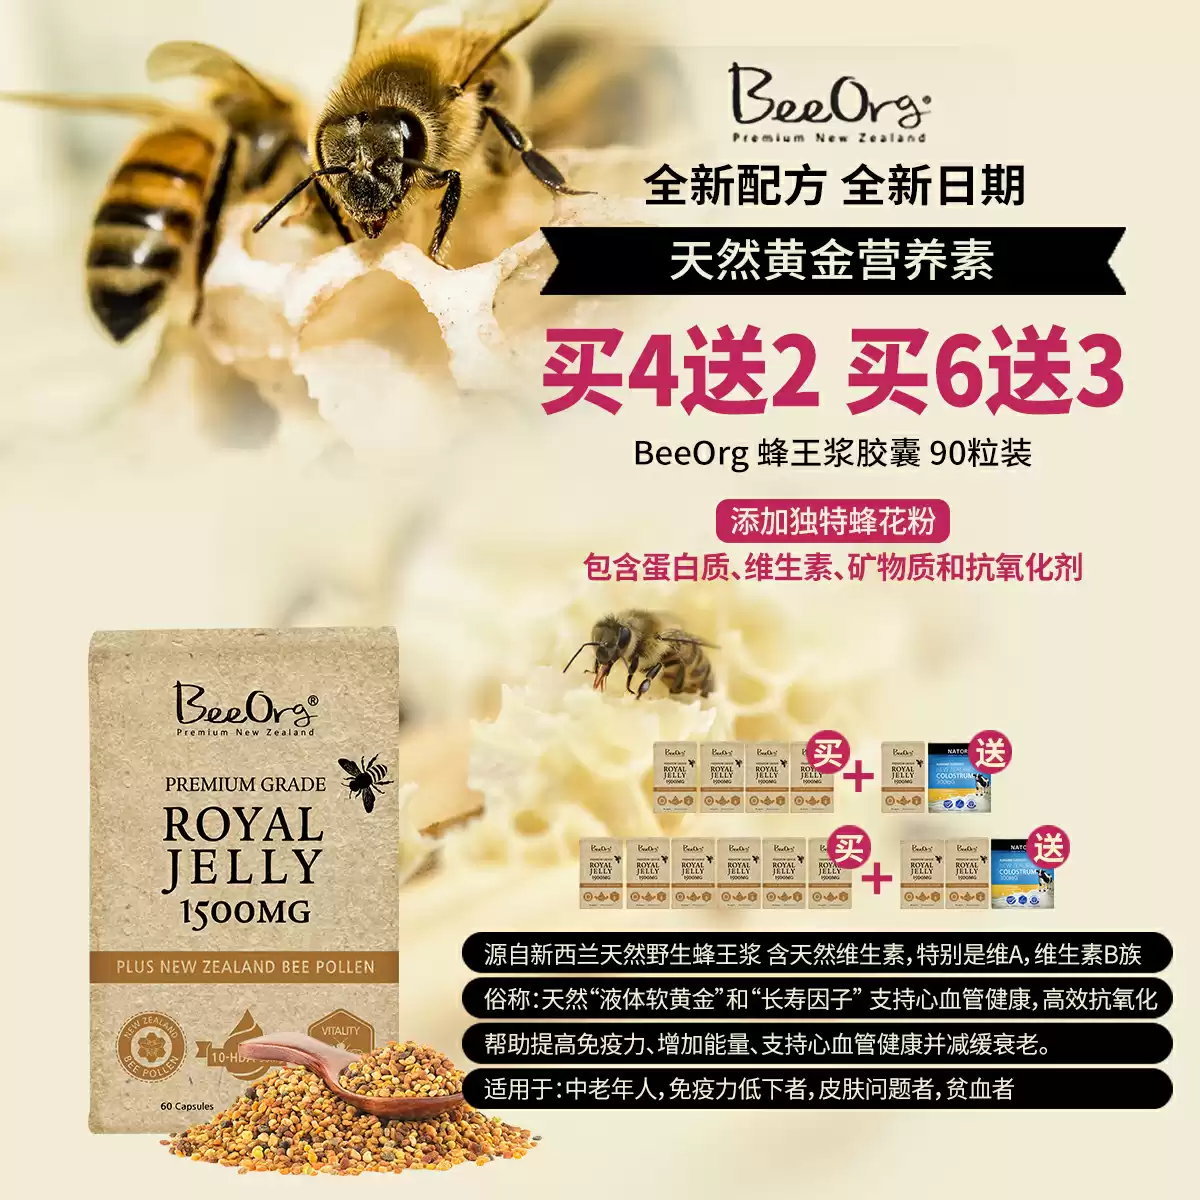 BEEORG Royal Jelly 1500mg +Beepollen 60 caps buy 4 get 2 for free and buy 6 get 3 for free